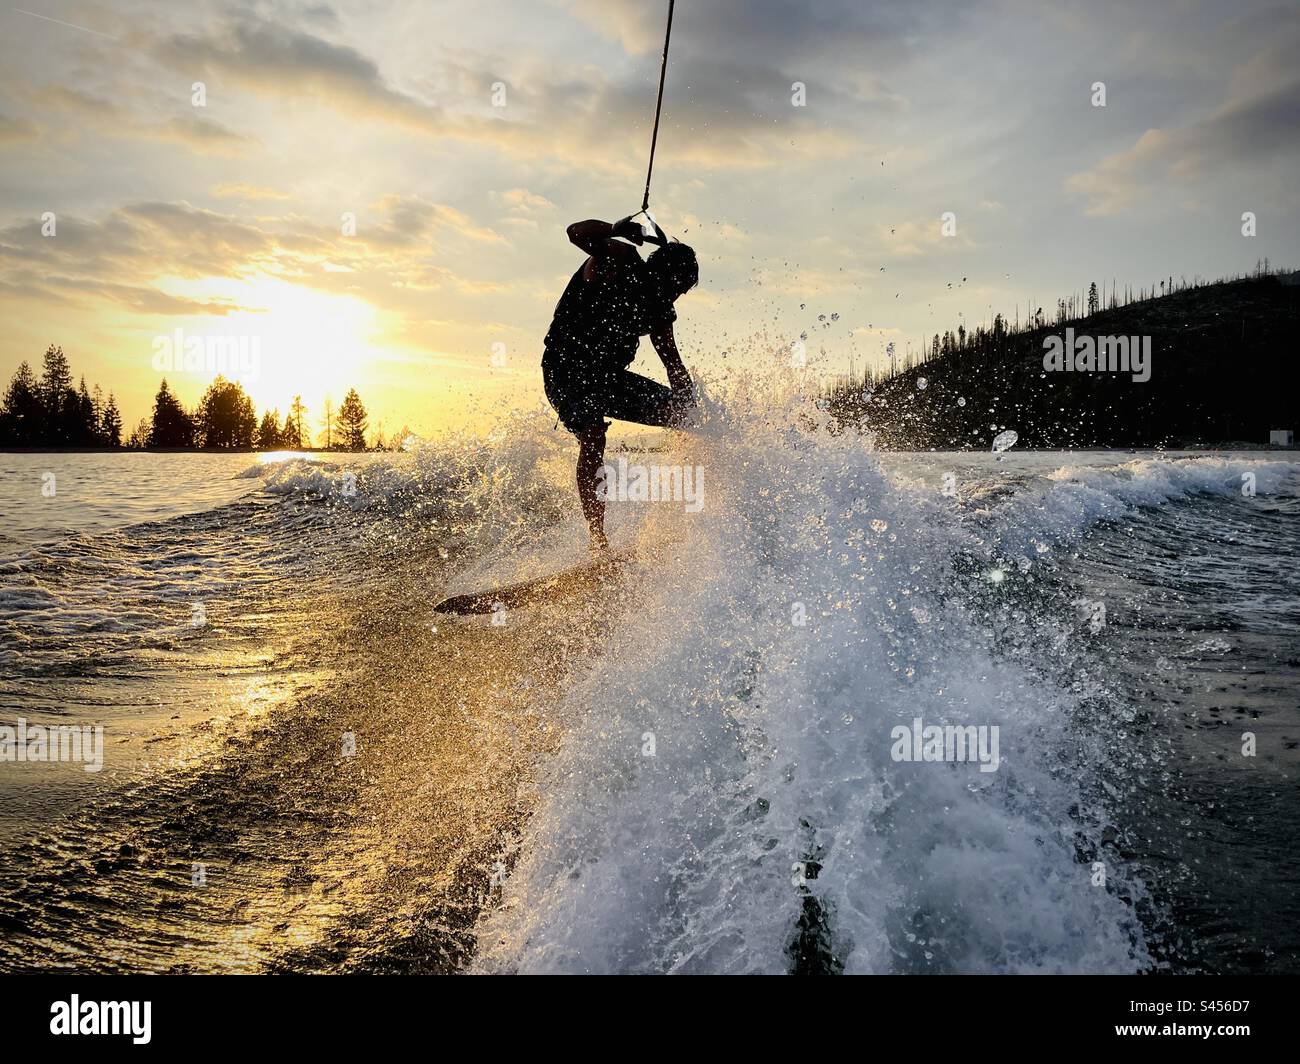 Male wakeboarder does a turn on the lake at sunset. Shaver Lake, California USA. Stock Photo